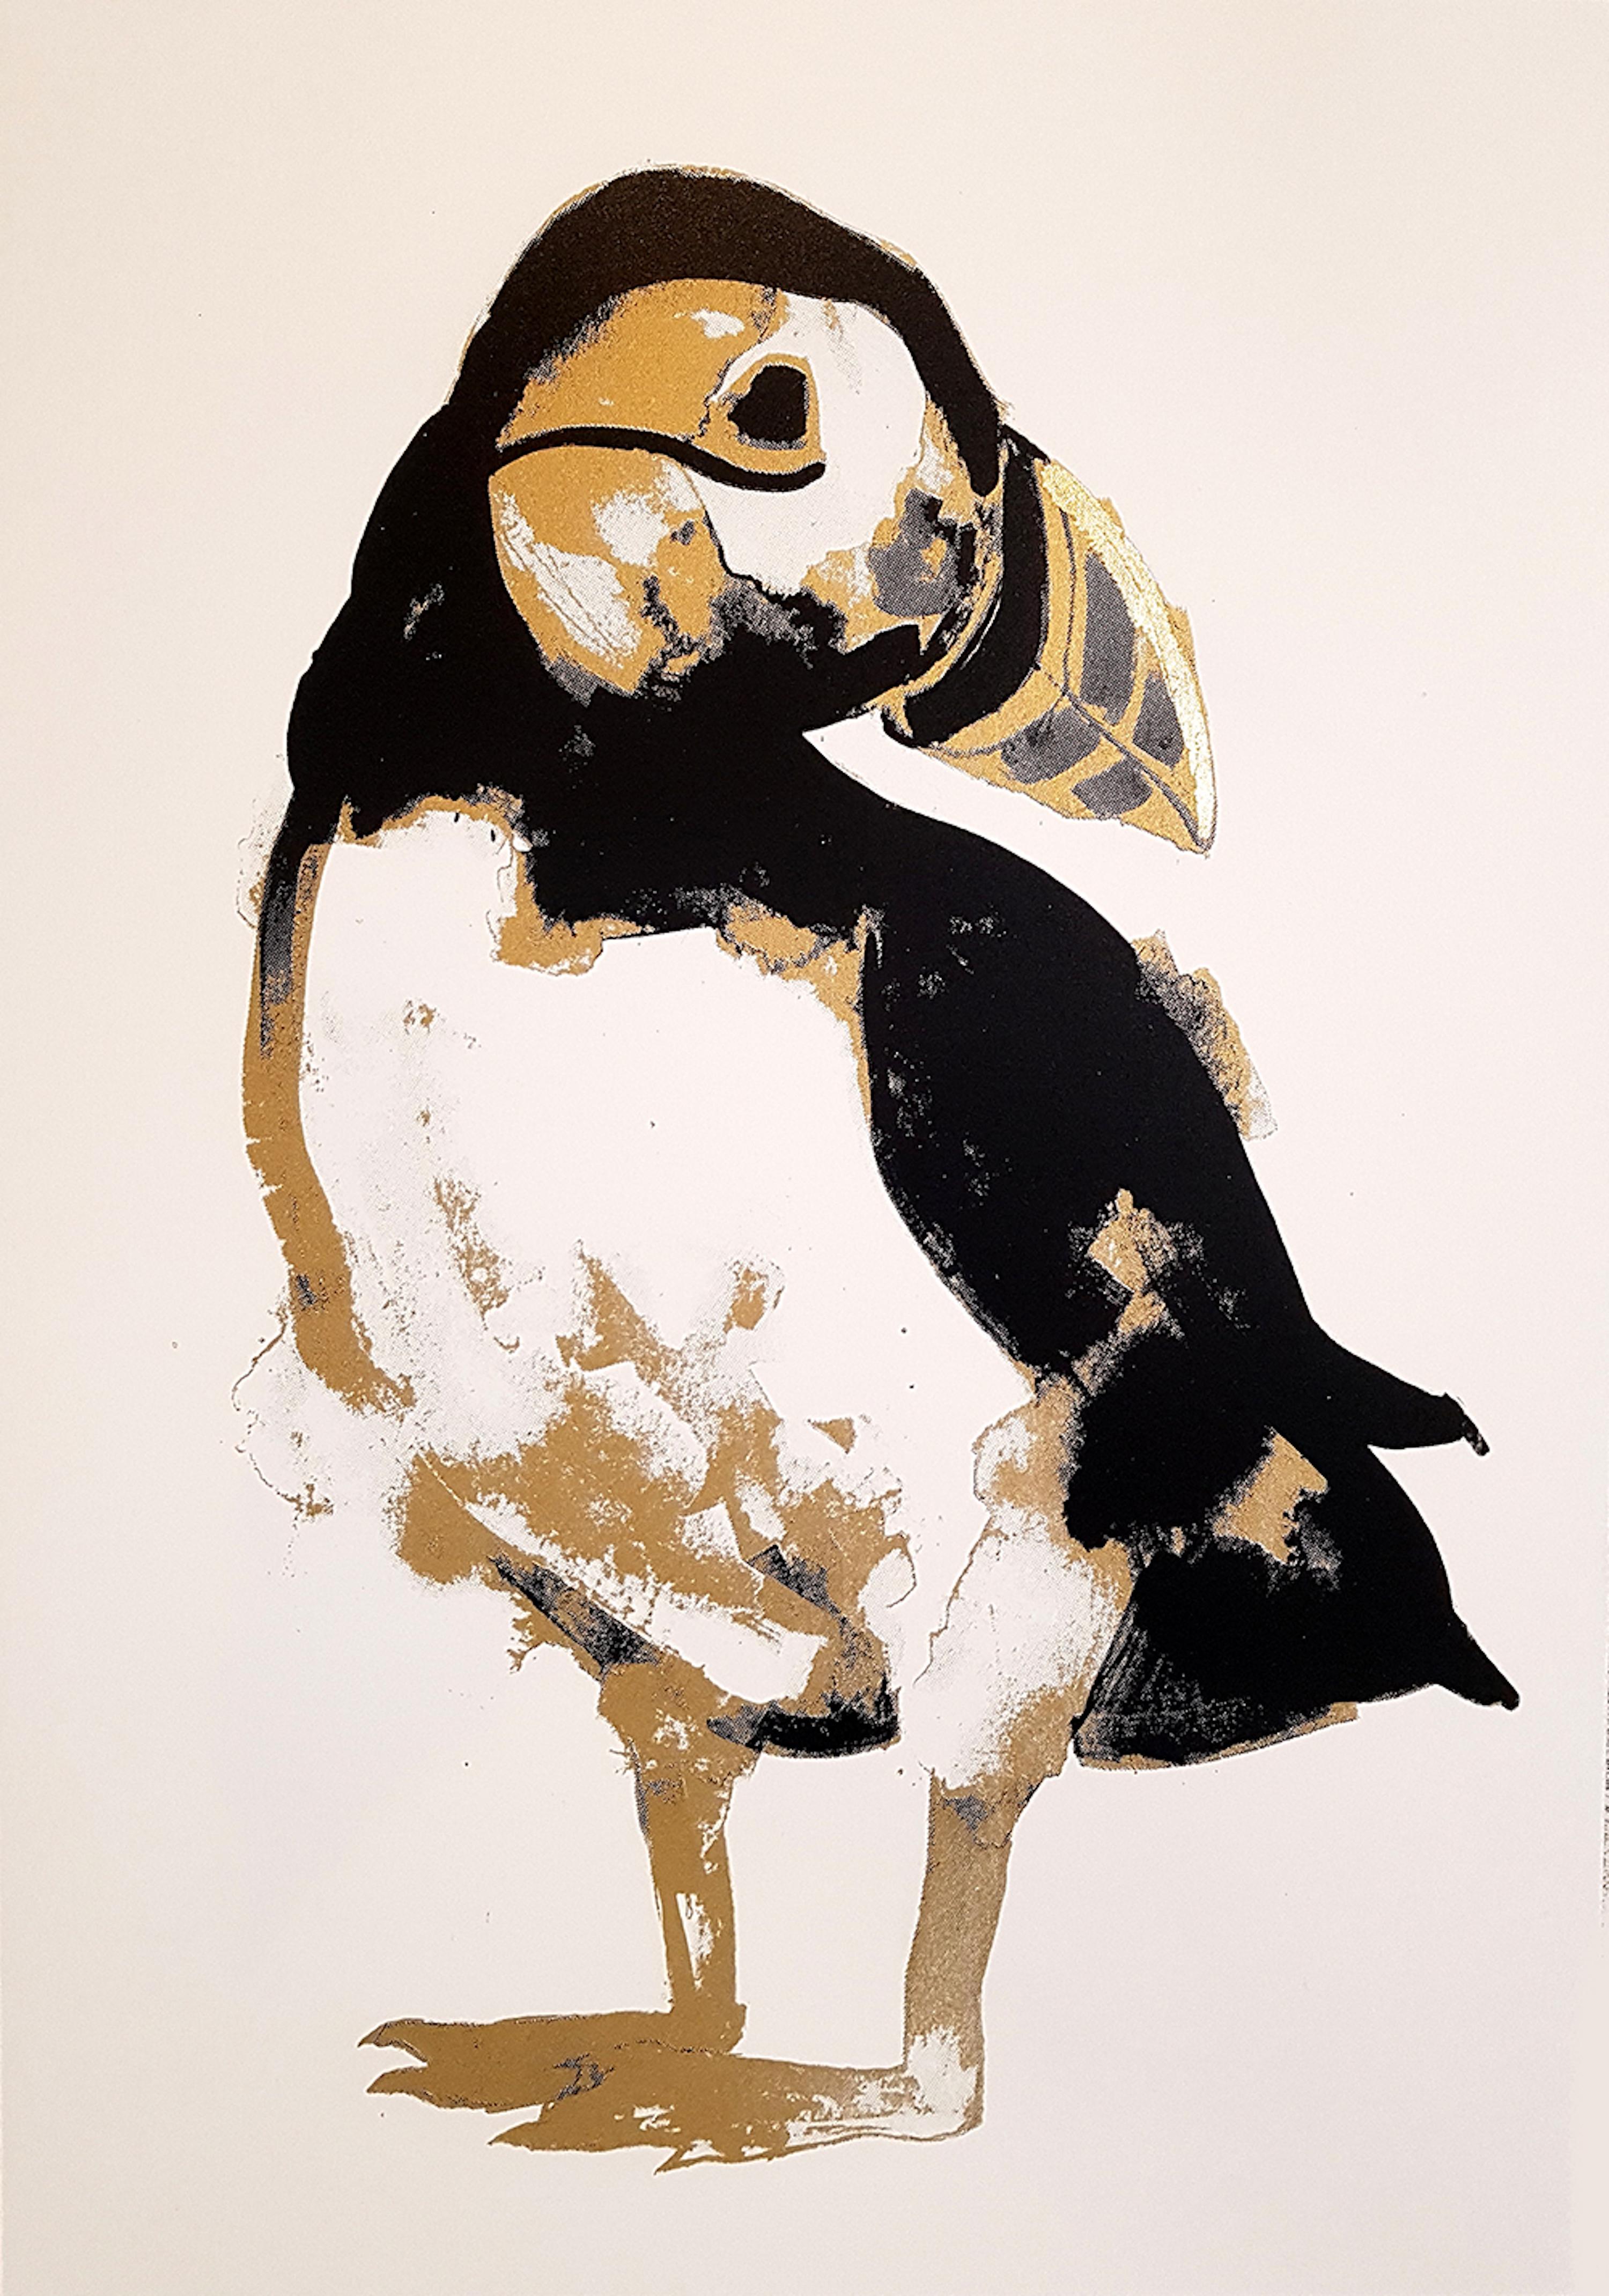 Gavin Dobson
Puffin Gold
Limited Edition Screen Print
Edition of 50
Signed
Size: H 50cm x W 35cm x D 0.1cm
Puffin Gold is a limited edition print by Gavin Dobson. A special gold edition of this best selling piece. Satin black ink with a vintage gold